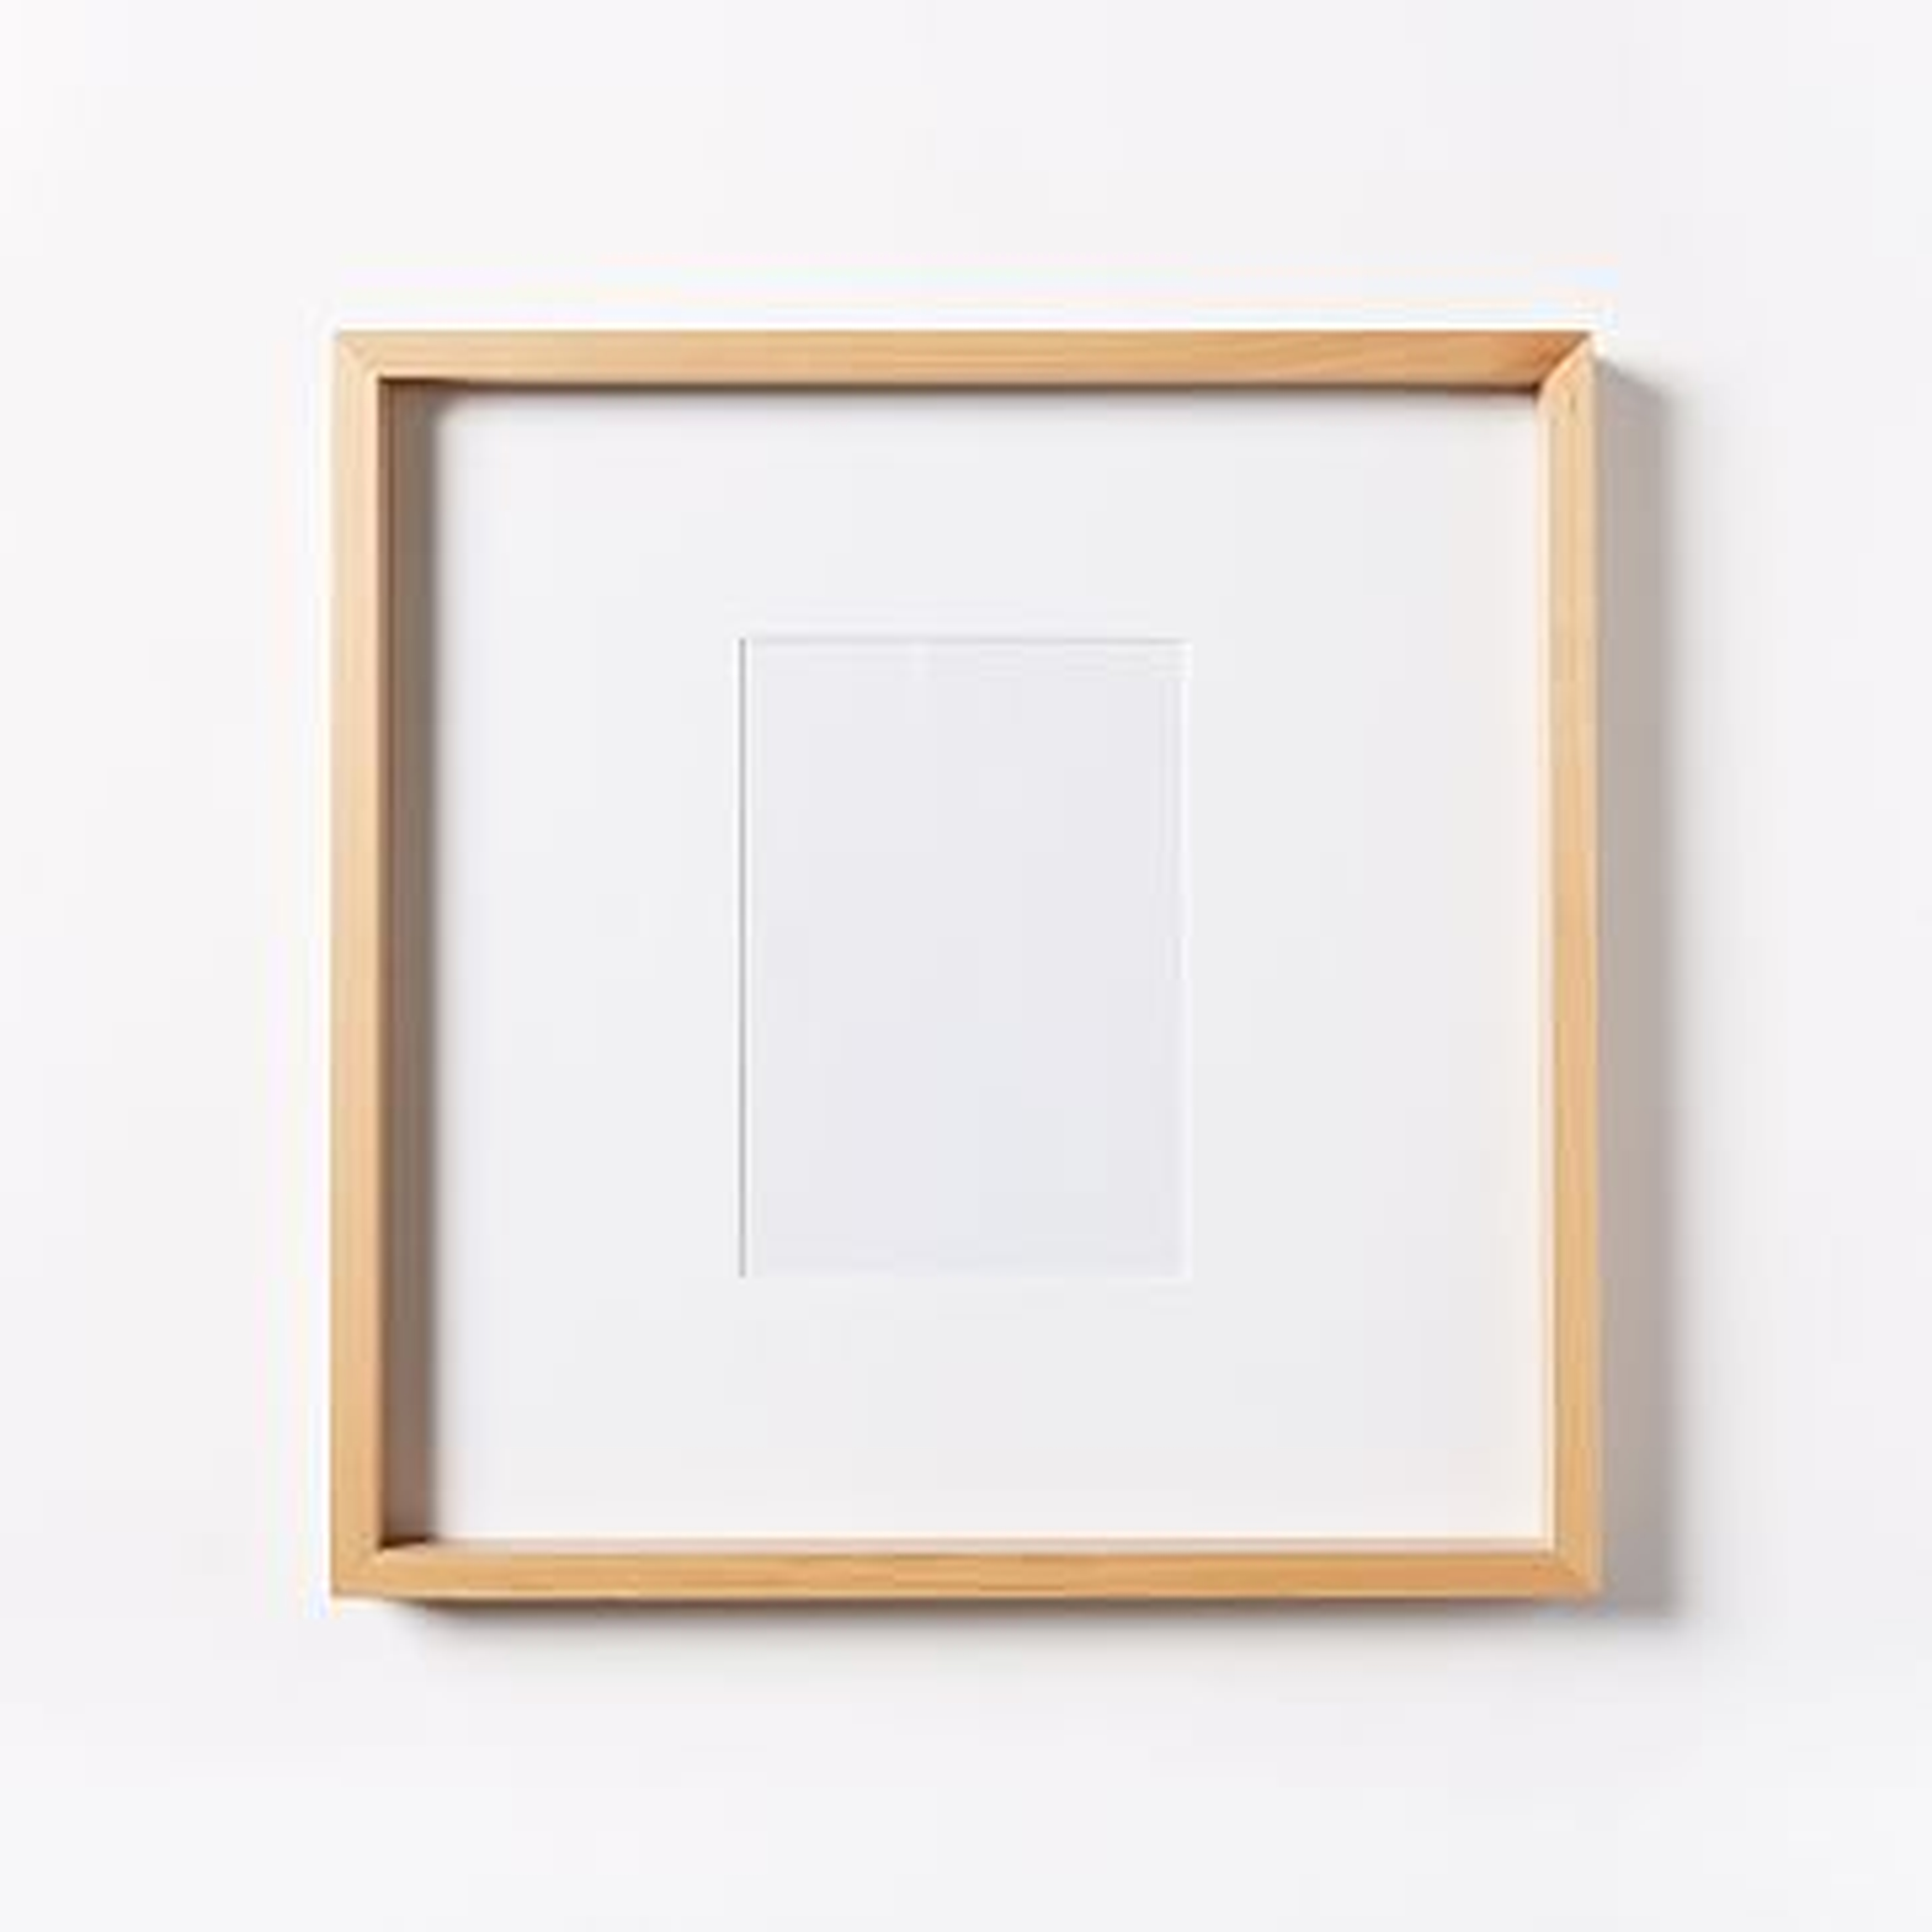 Thin Wood Gallery Frame, wheat, Individual, 5"x 7" (12" x 12" without mat) - West Elm